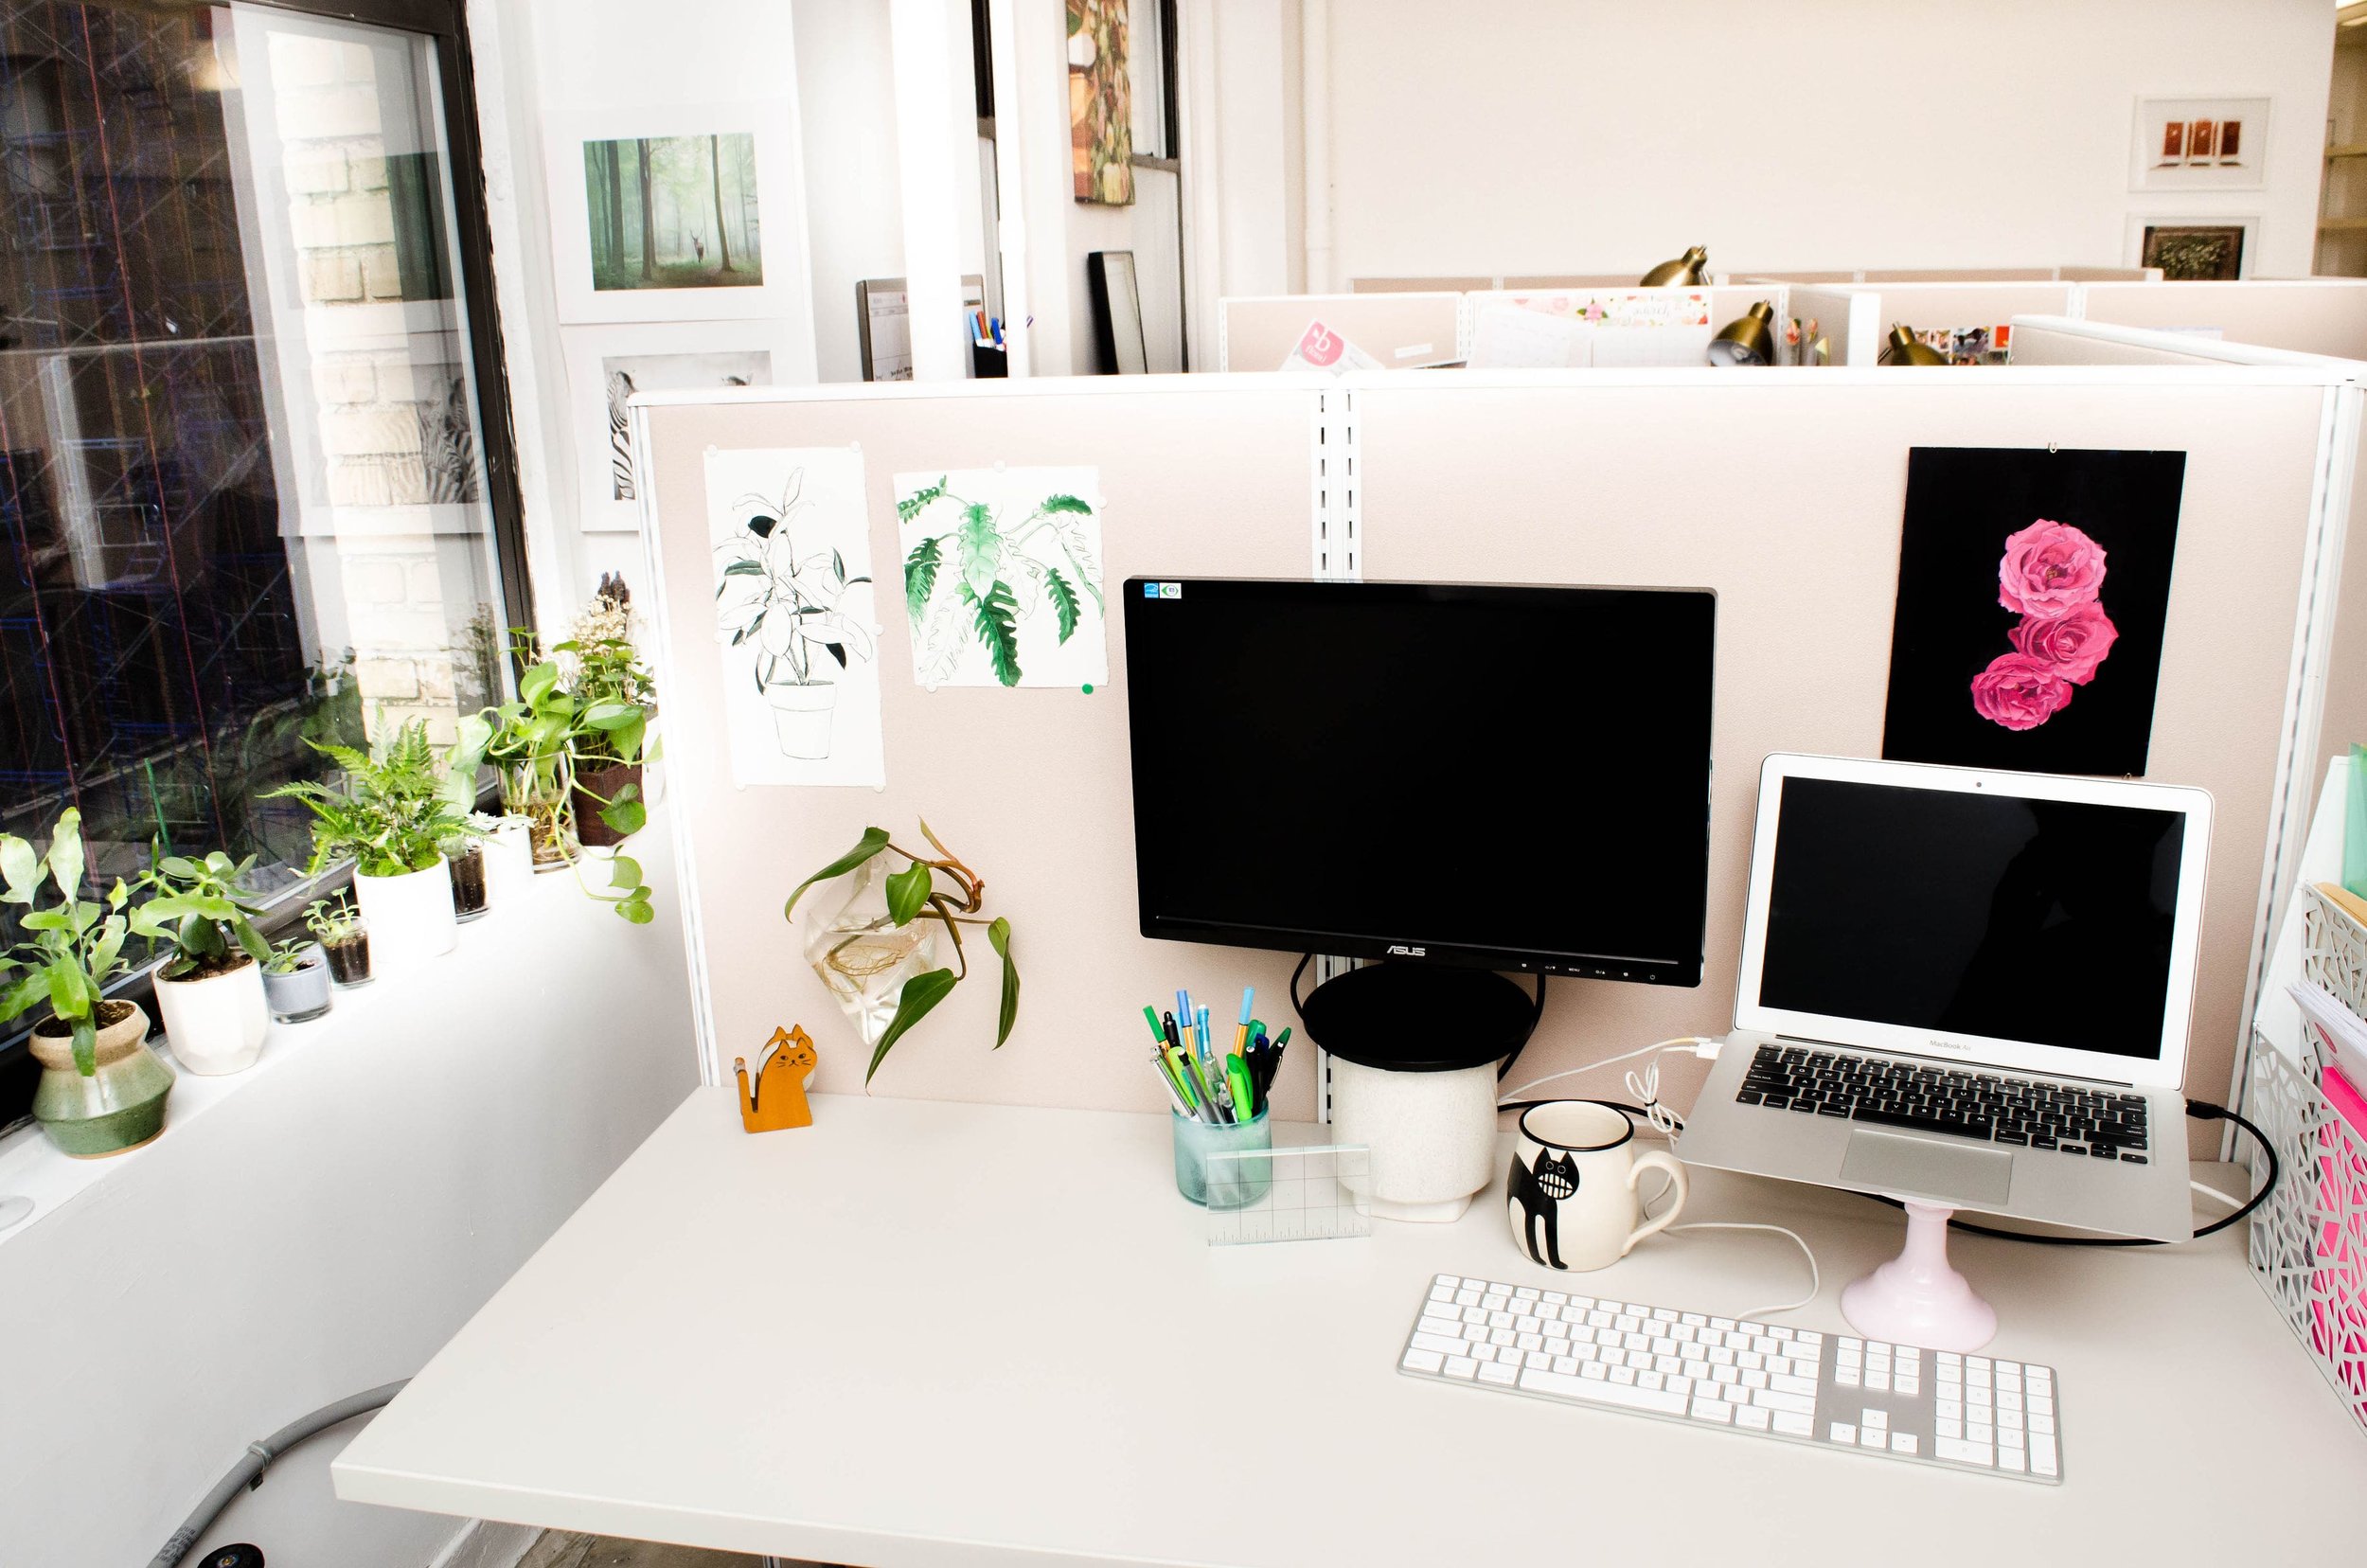 NEW - OFFICE - SPACE - MANHATTAN - COOL - OPEN - DESK - CUBICLE - B FLORAL